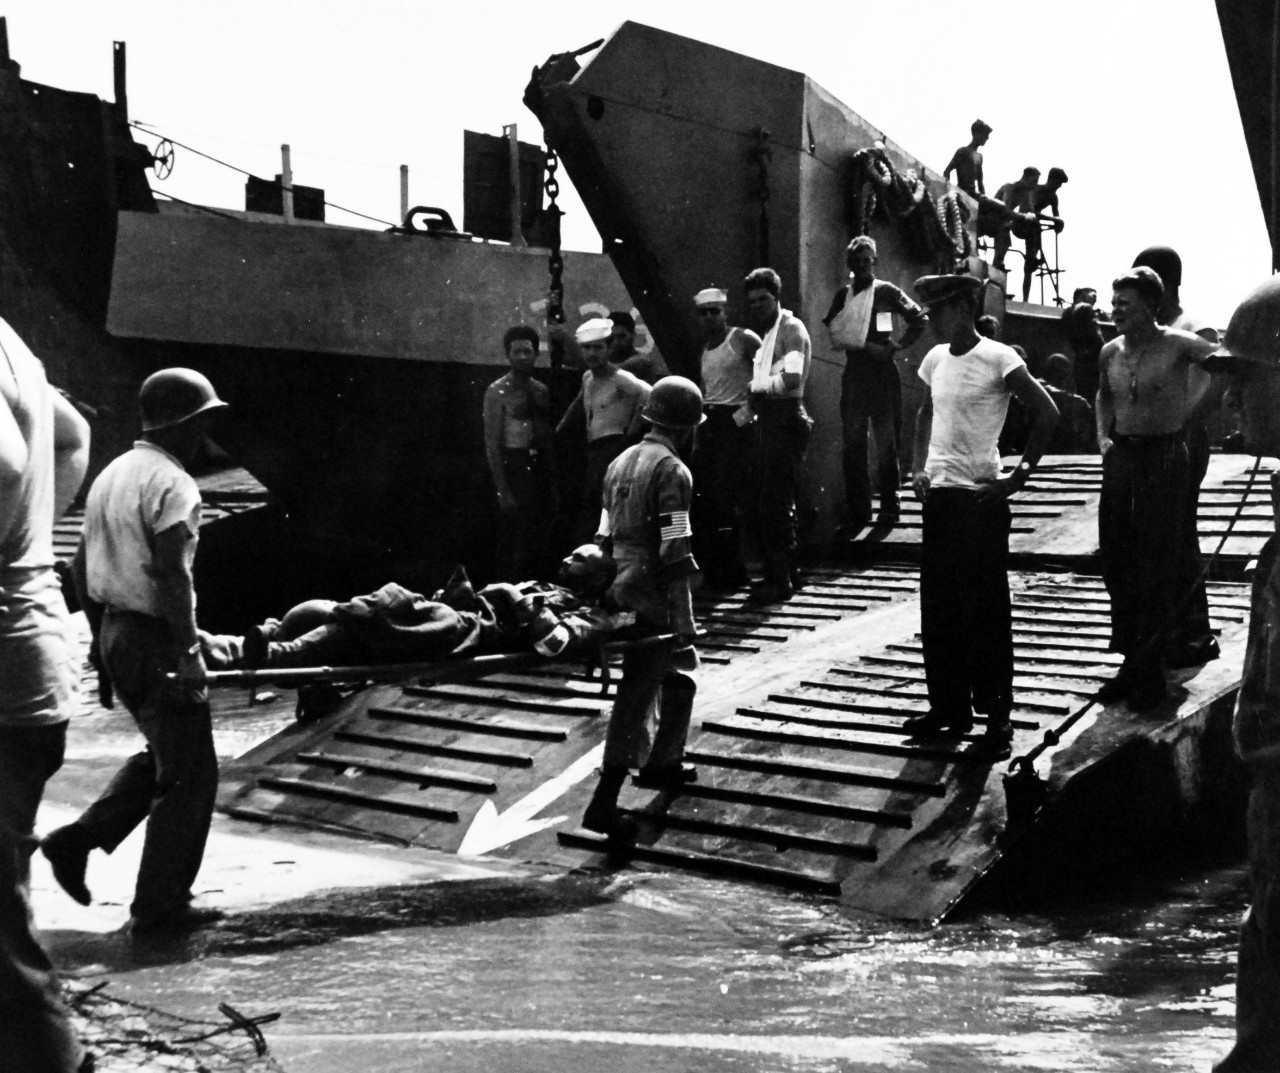 80-G-242119:   Invasion of Southern France, August 1944.     Men wounded in invasion of Southern France are carried onboard landing craft to hospital ships off the coast for treatment and transportation to rear area hospitals. Photographed by crewmember of USS Catoctin (AGC 5), 16 August 1944.  .  Official U.S. Navy Photograph, now in the collections of the U.S. Navy.   (2014/5/22).